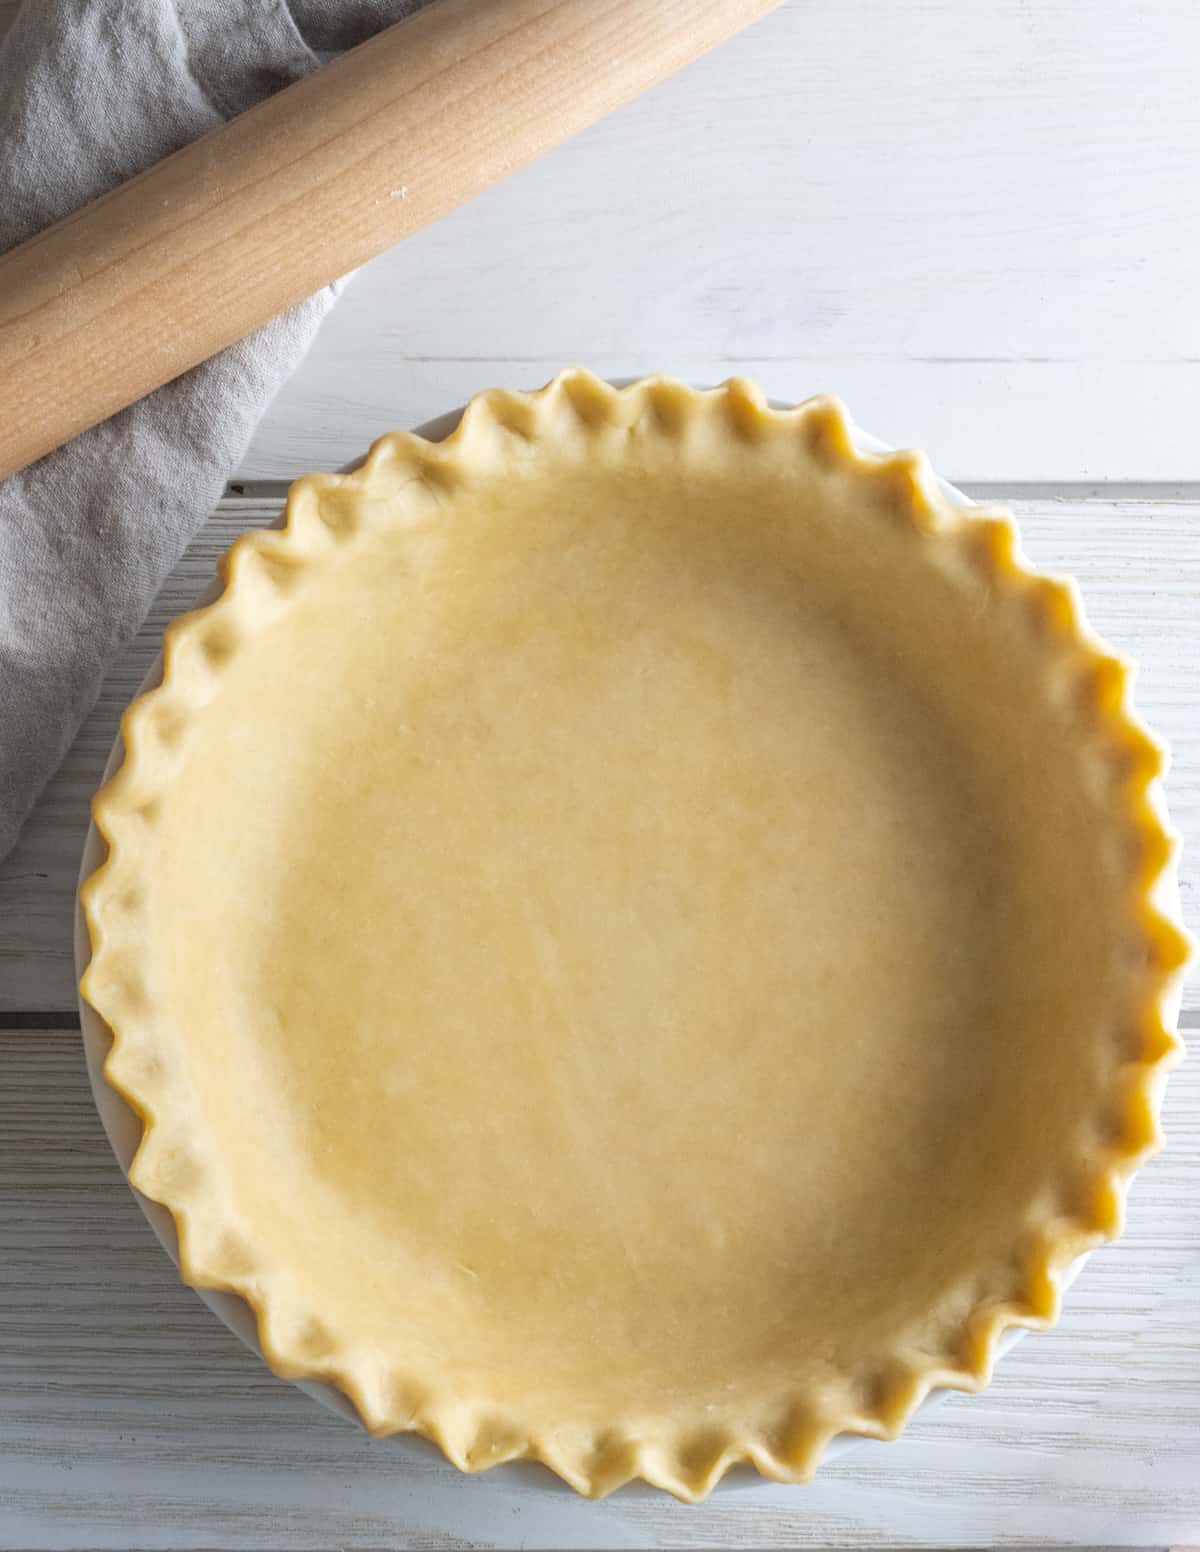 Overhead view of an unbaked pie crust with crimped edges in a pie plate.